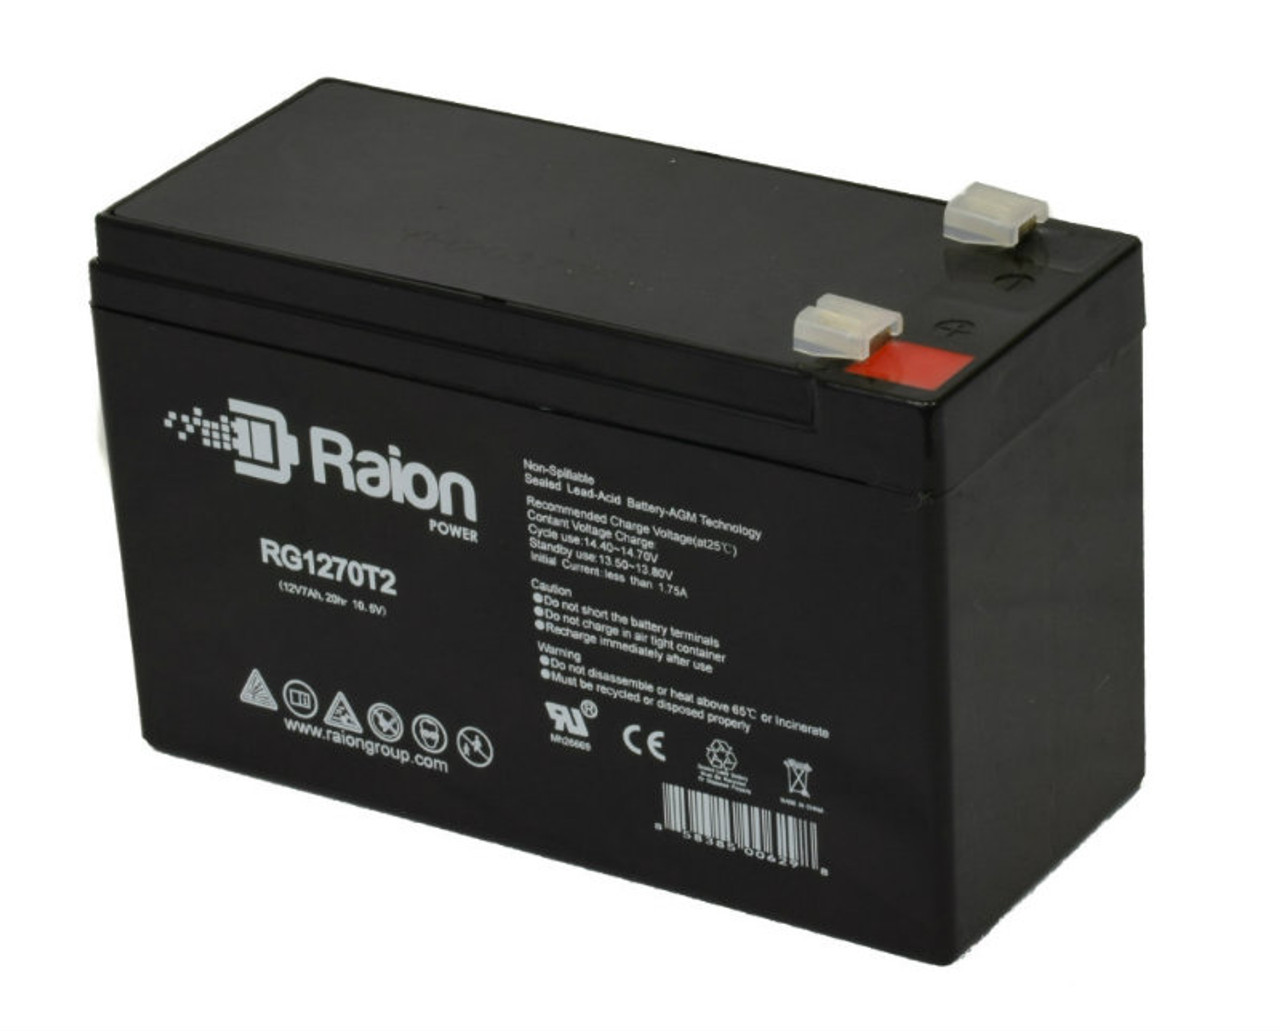 Raion Power RG1270T1 12V 7Ah Non-Spillable Replacement Battery for Canbat CBL7.2-12 F1